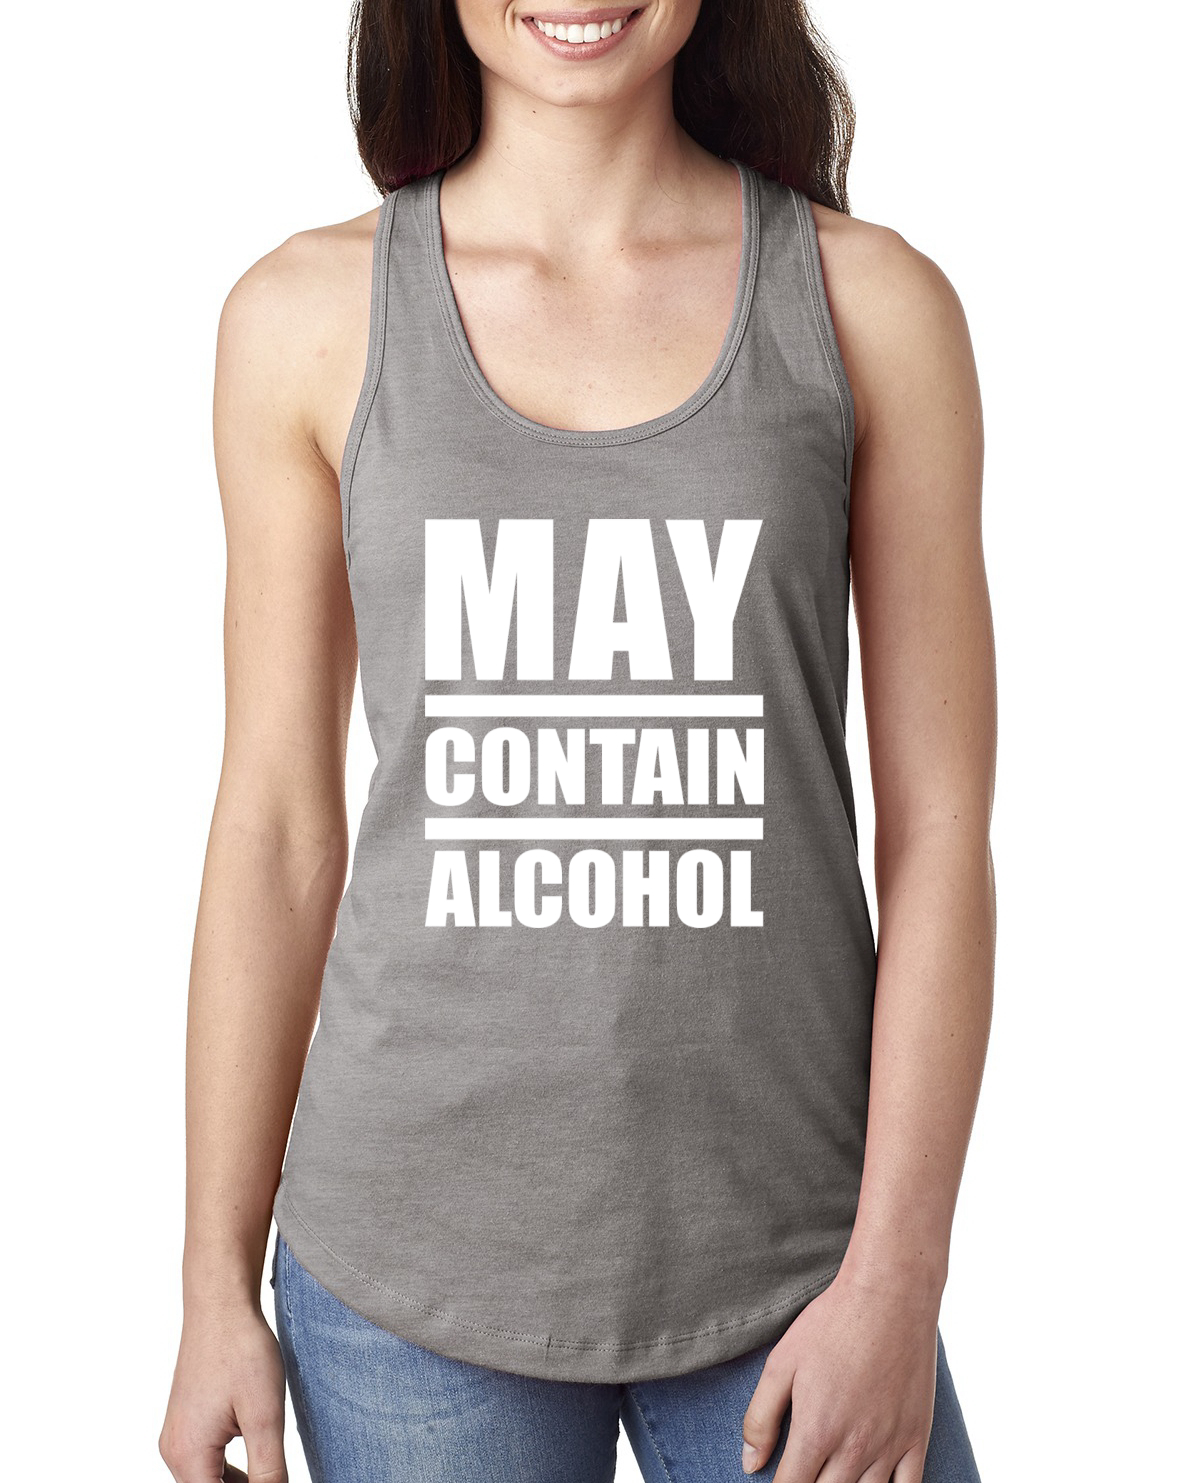 May Contain Alcohol Funny Womens Jersey Racerback Tank Top Drinking Party Shirt Ebay